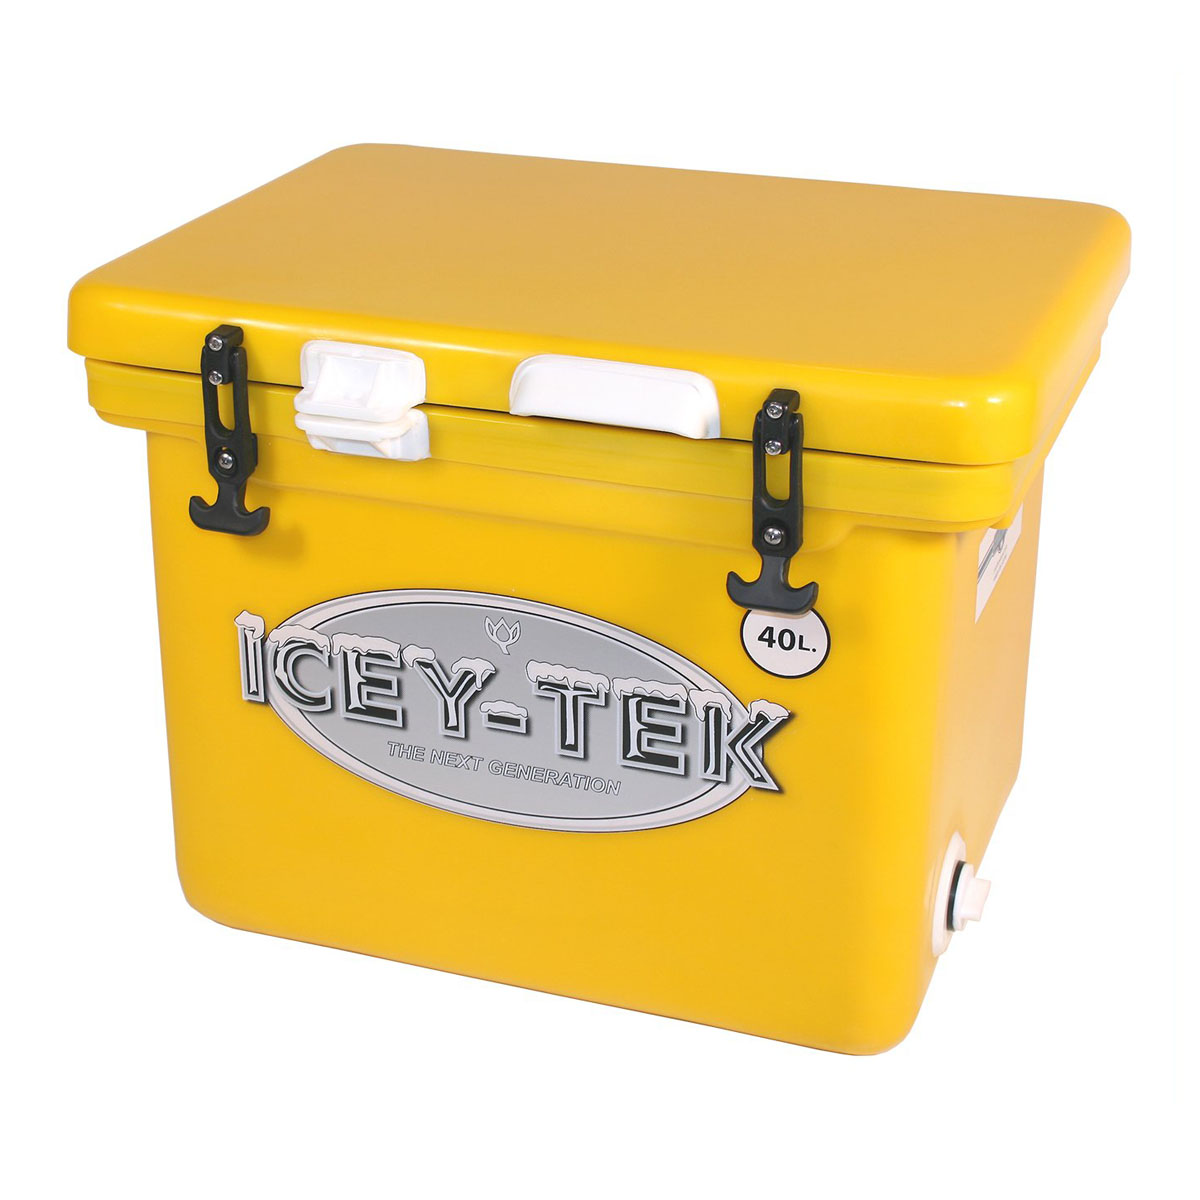 Built For Life Camping & Commercial Ice Chest Cooler Cold up to 10 days Icey-Tek 40 Litre Premium Cube Cool Box in BLUE 